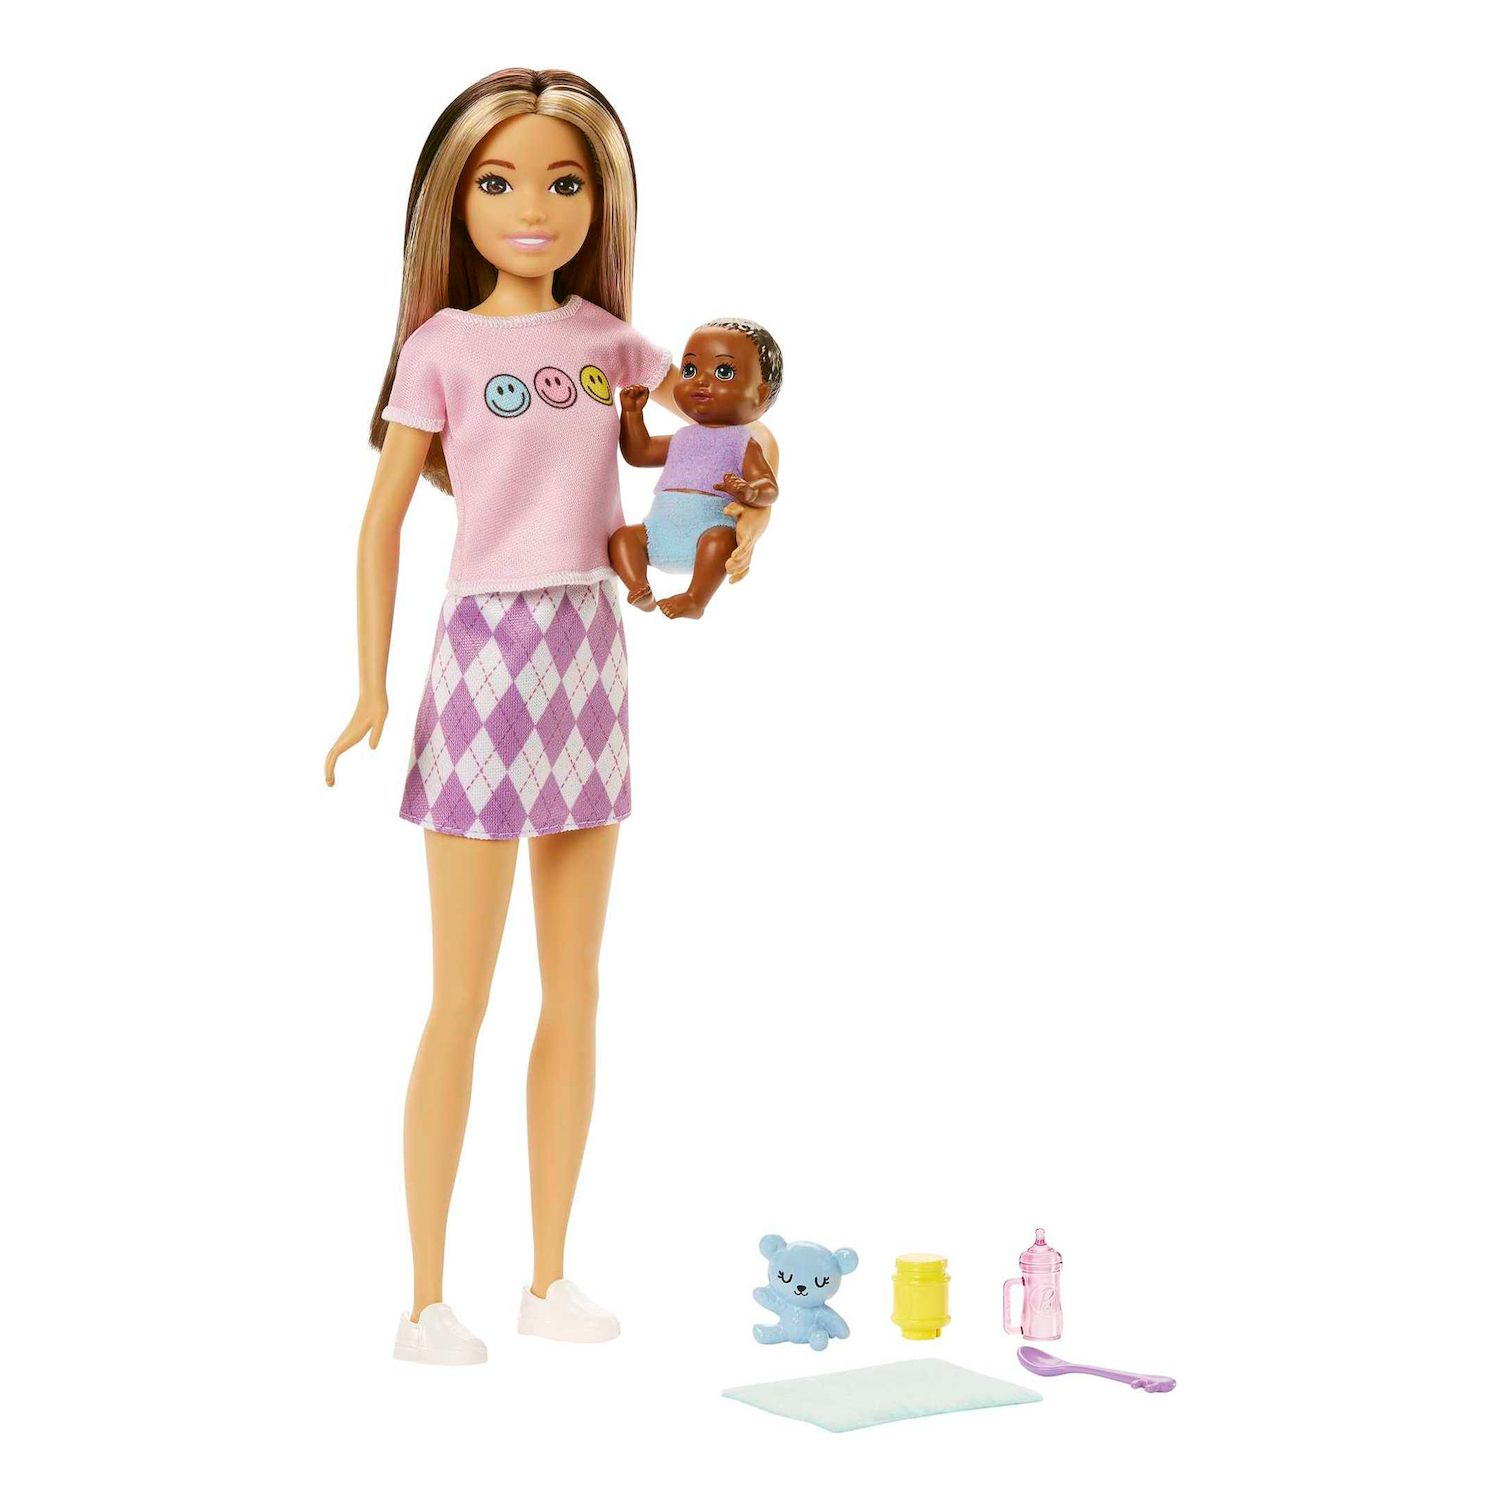 Barbie Skipper Doll and Nurturing Playset with Lambs